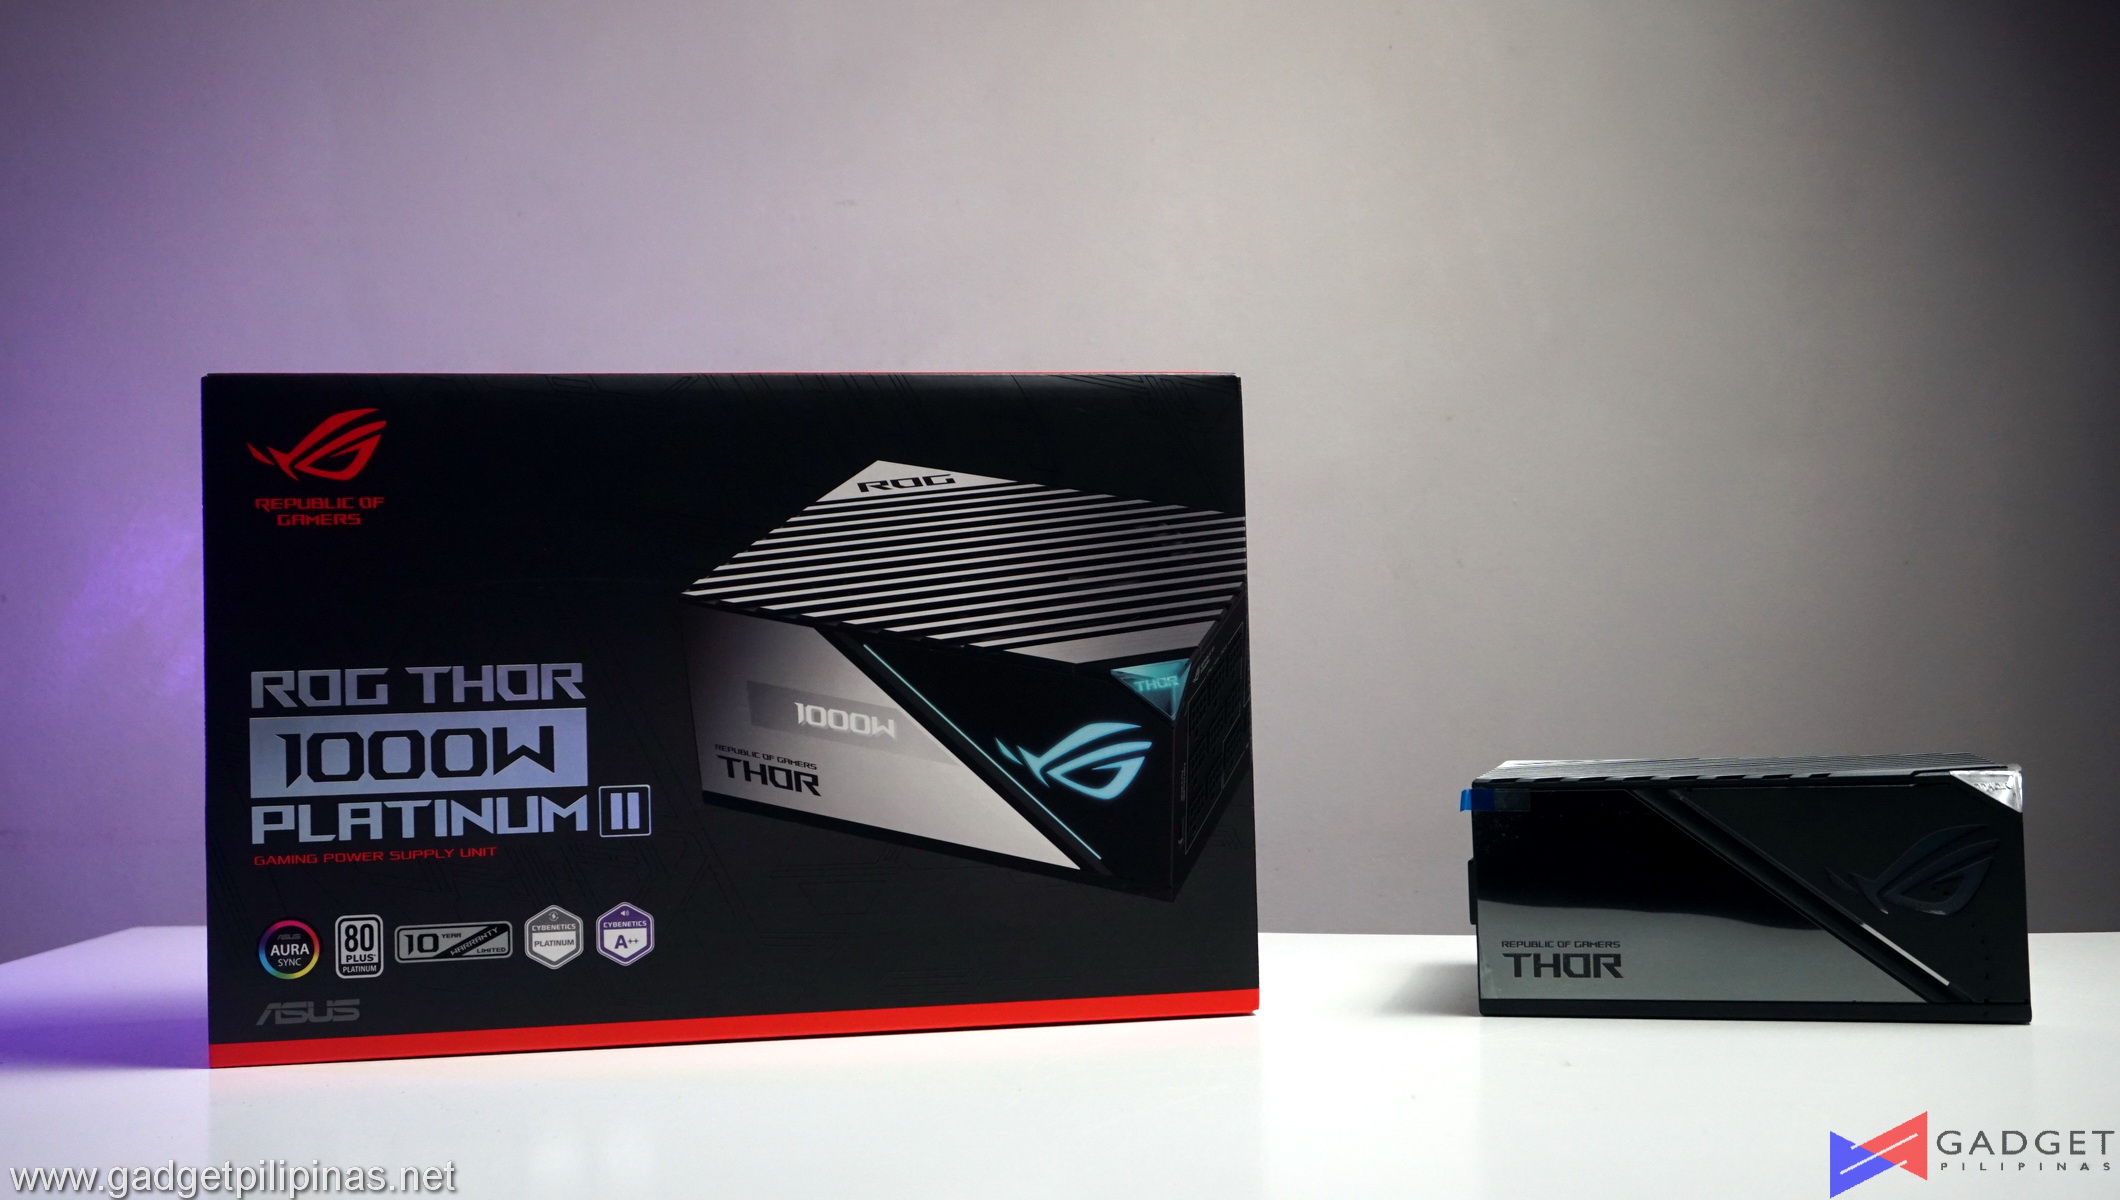 ASUS ROG Goes For Power Supplies: ROG Thor 1200W Platinum